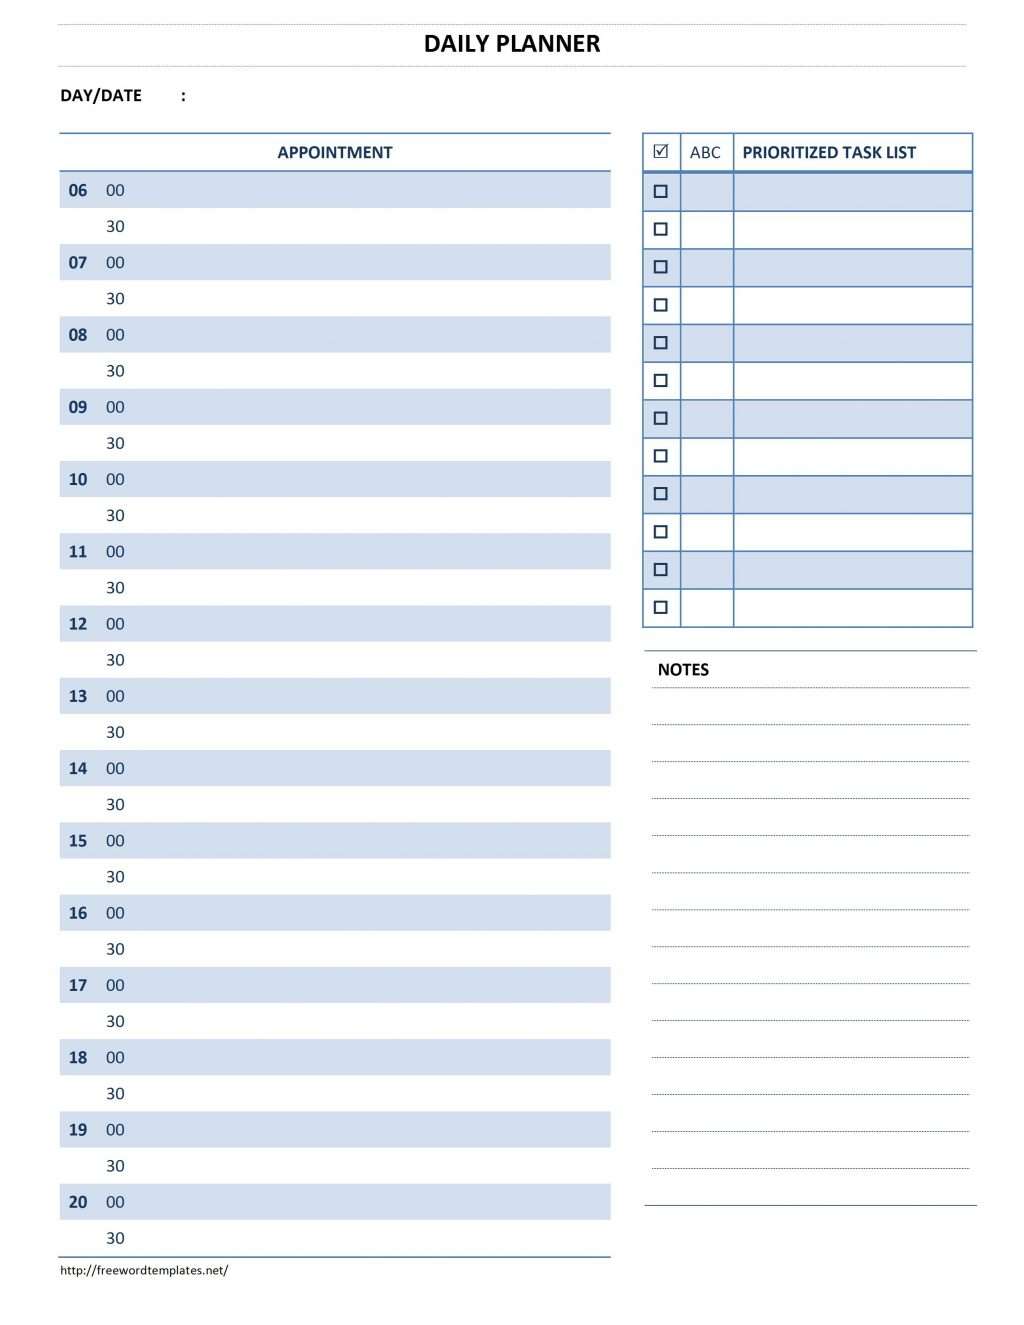 Daily Lesson Plan Ate Word Document Calendar Schedule Planner | Smorad - Free Printable Daily Appointment Planner Pages